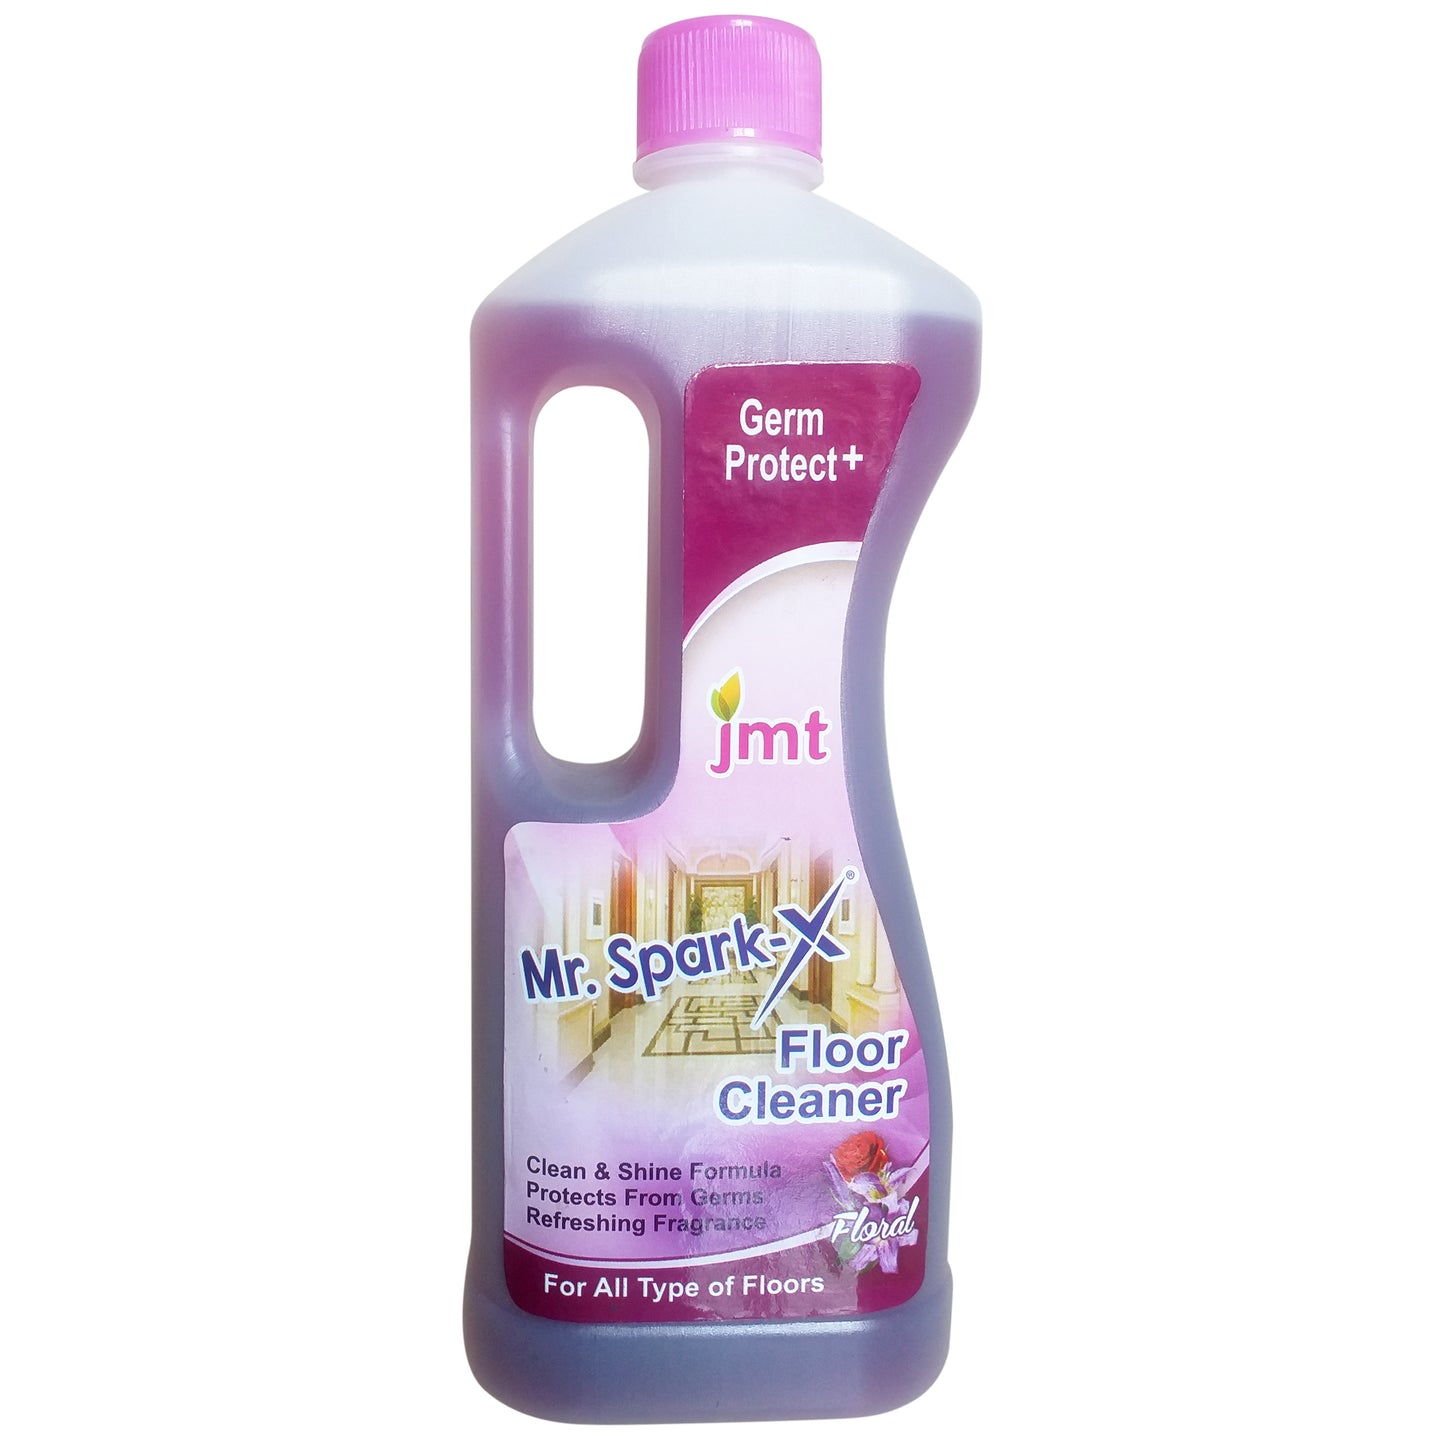 500ml Mr Spark-X Floor Cleaner with Germprotect+ Technology